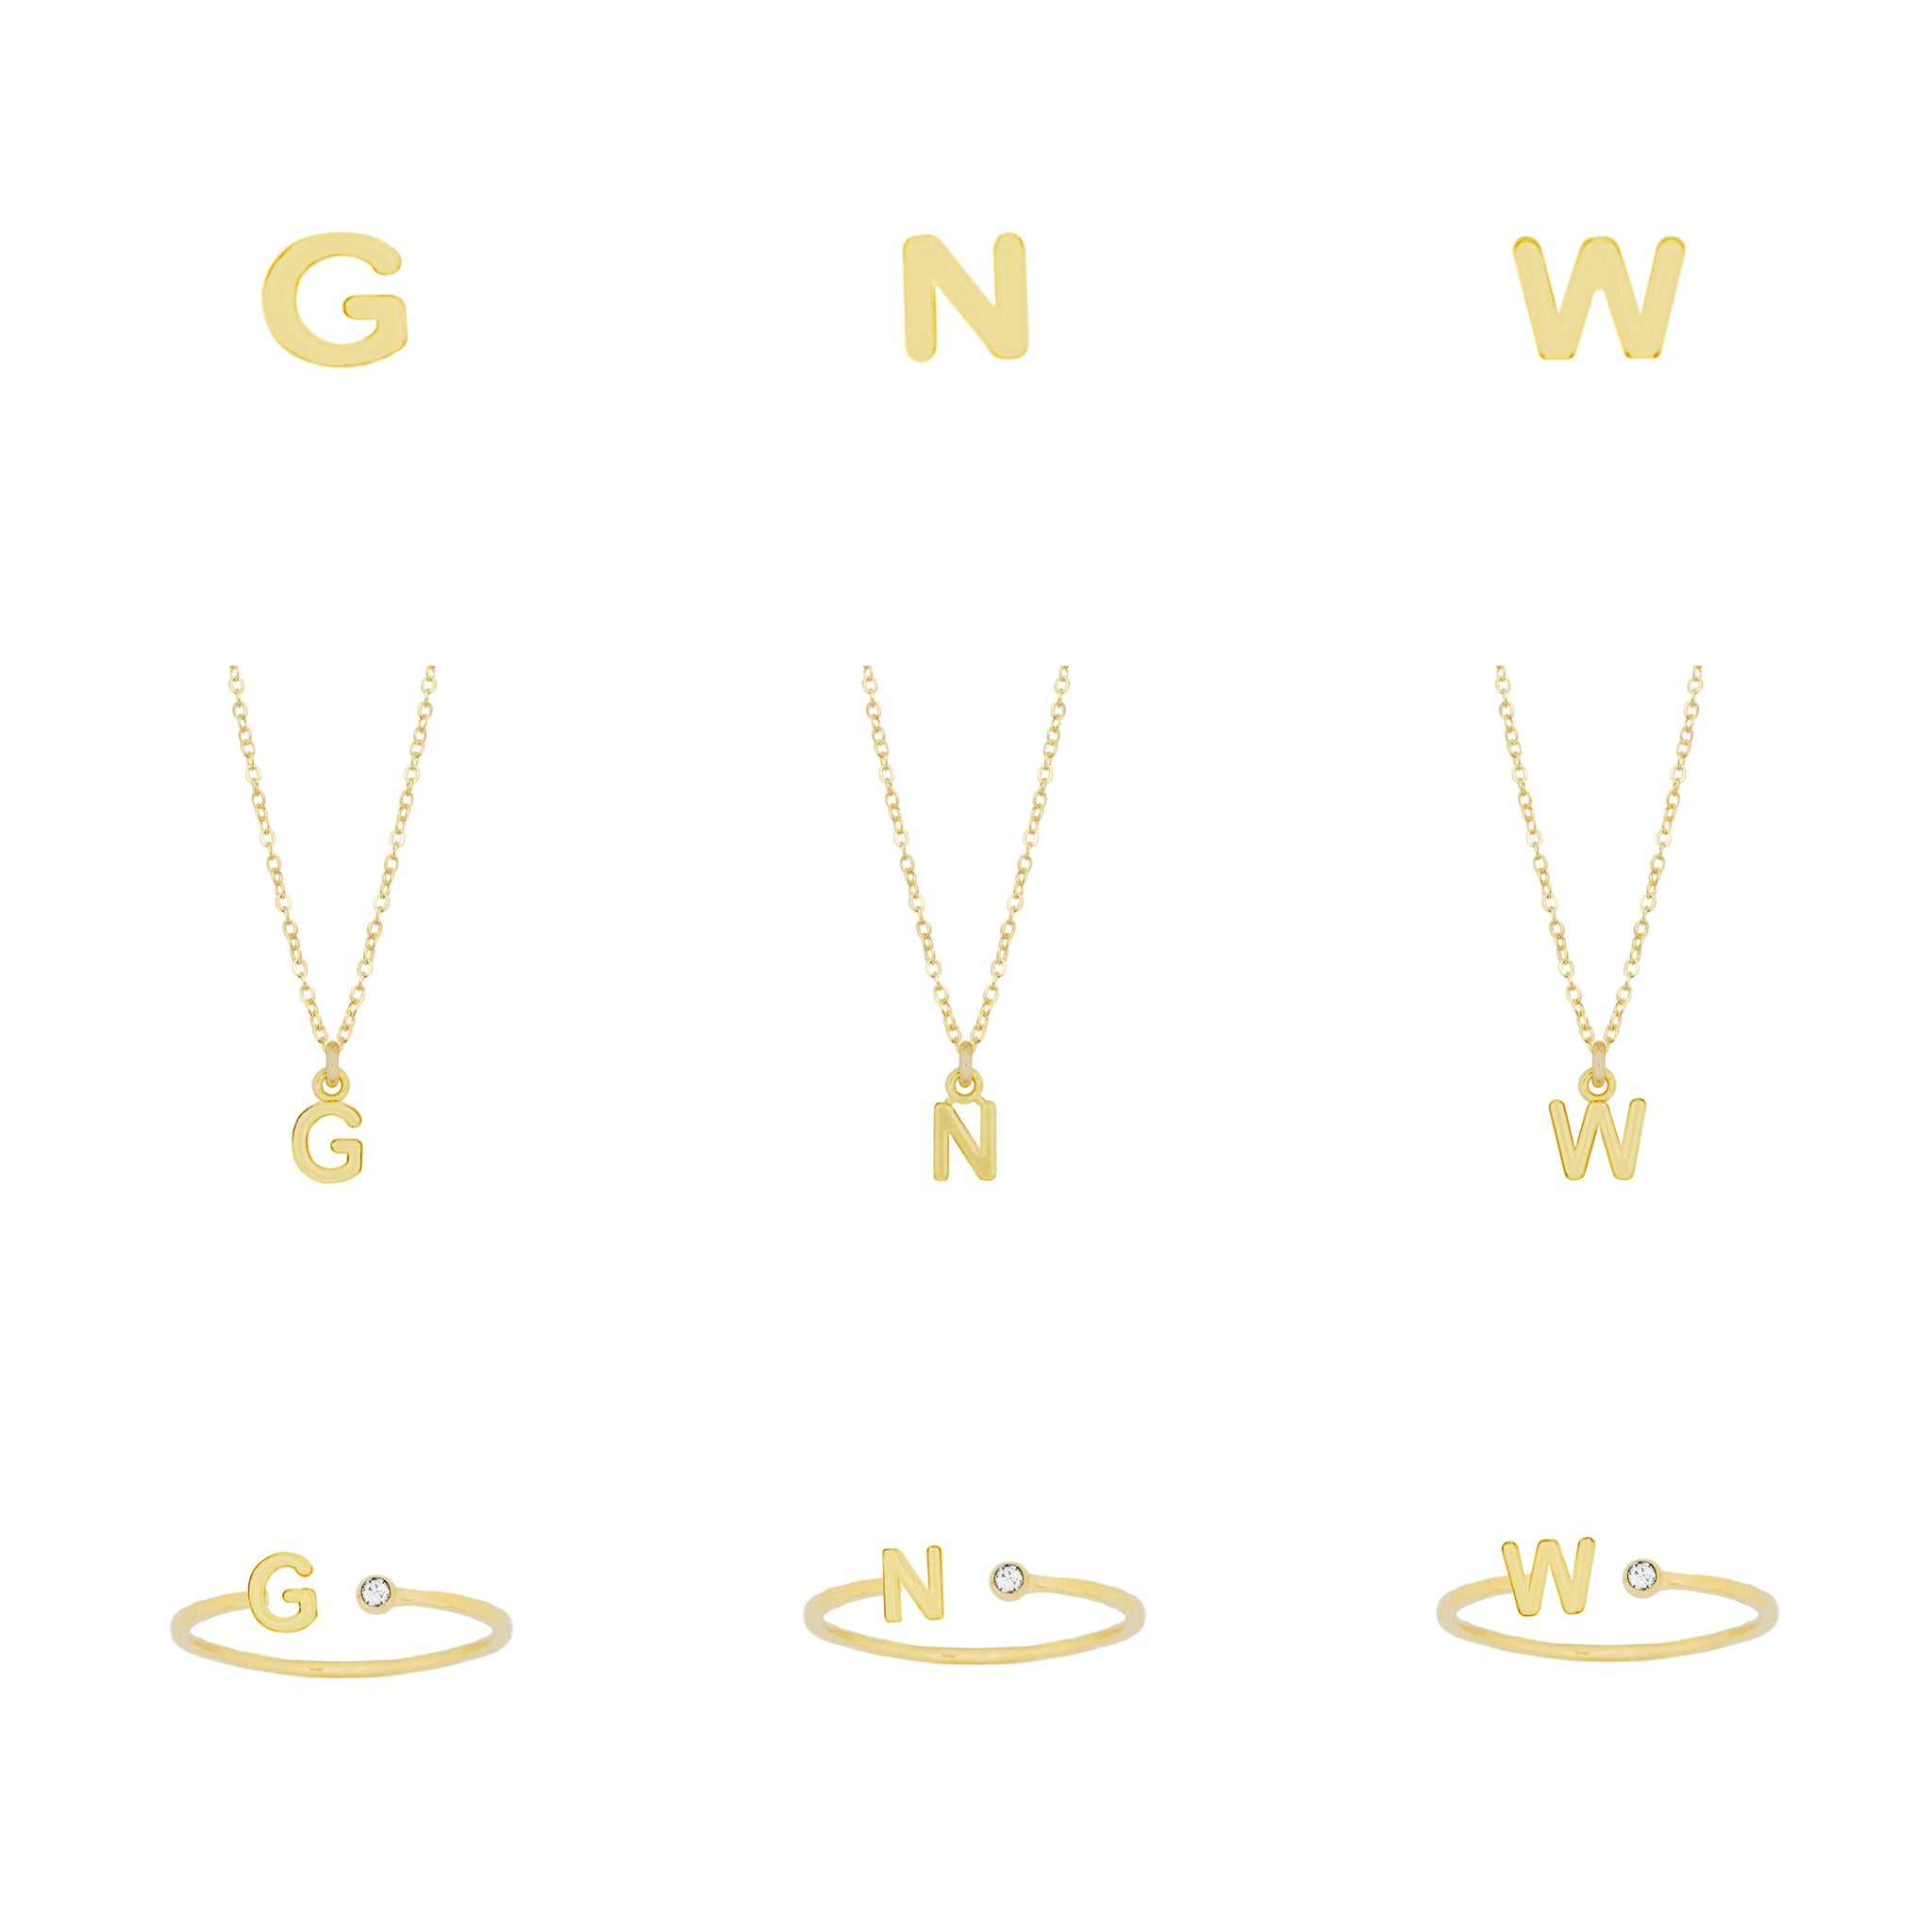 Initials G, N, W, Rings, Necklace, Stud, Katie Dean Jewelry